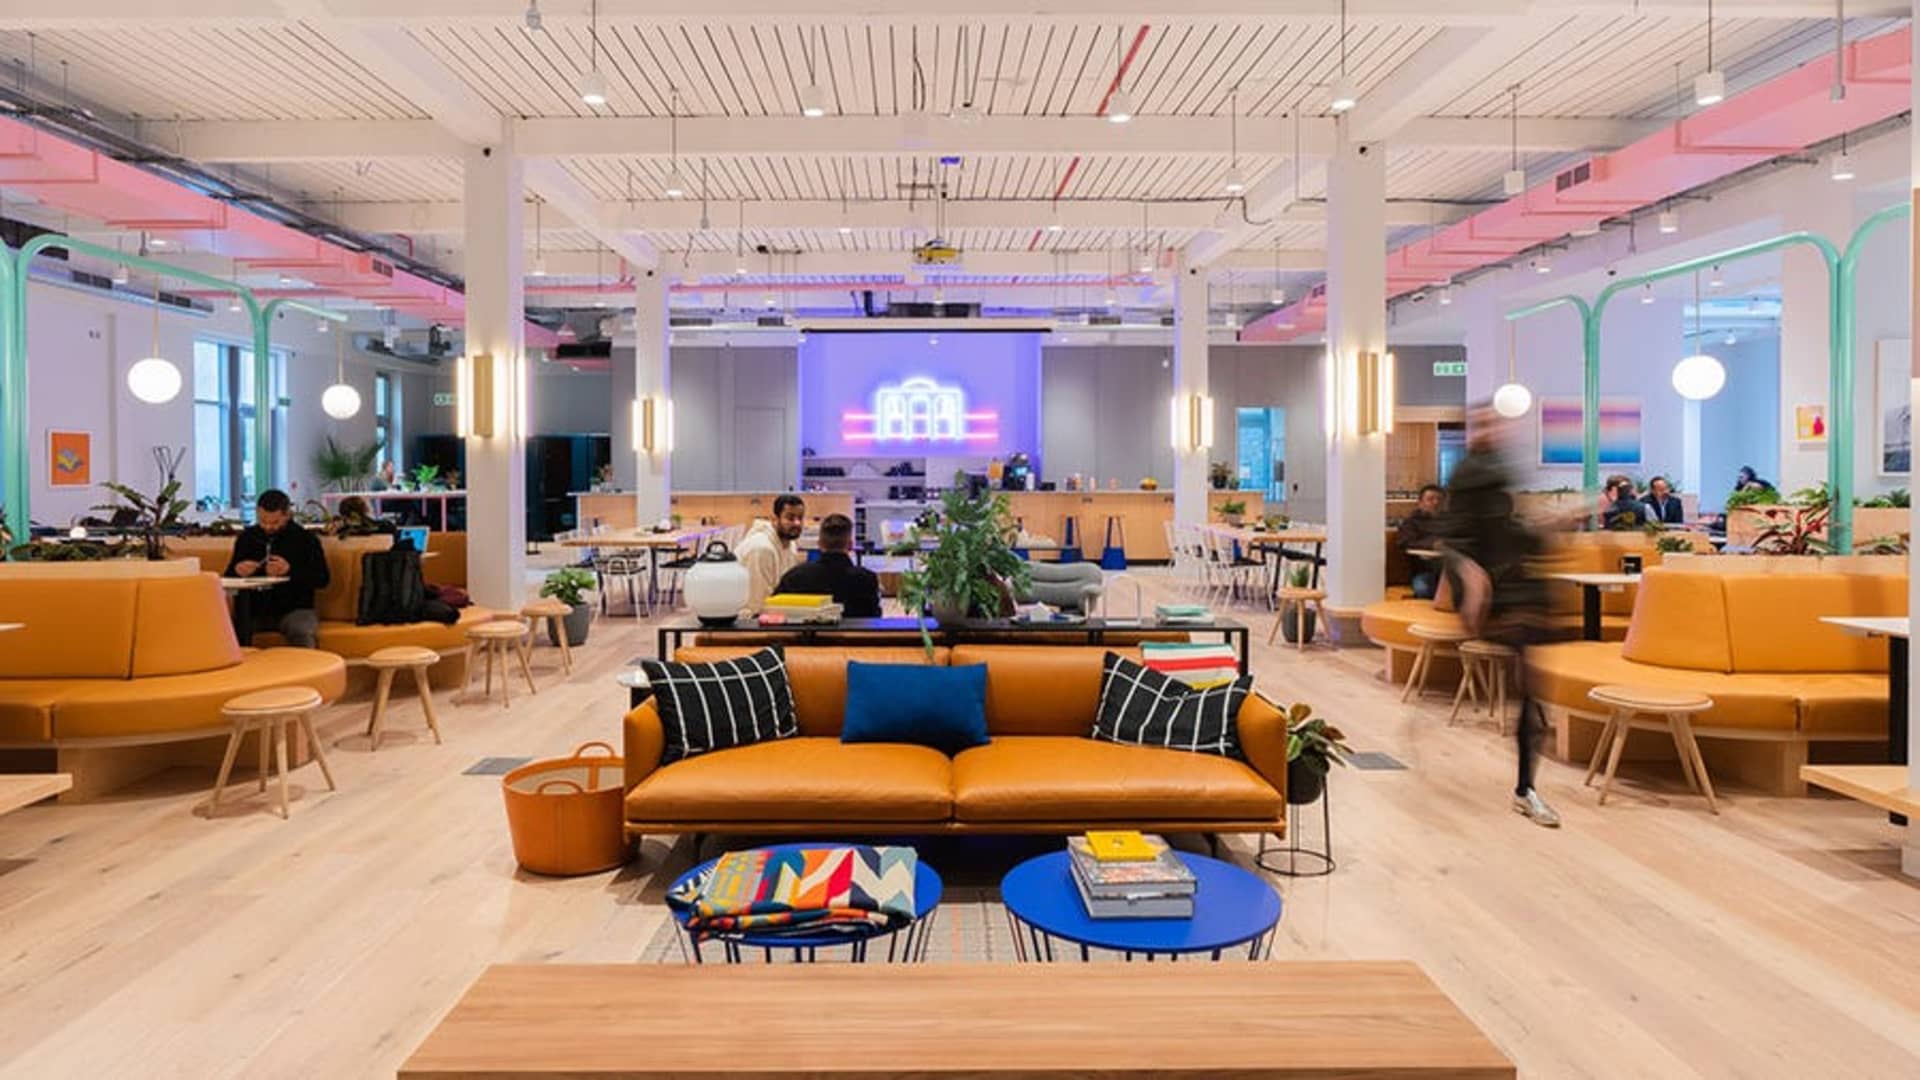 WeWork, which filed for bankruptcy, one of London's biggest tenants